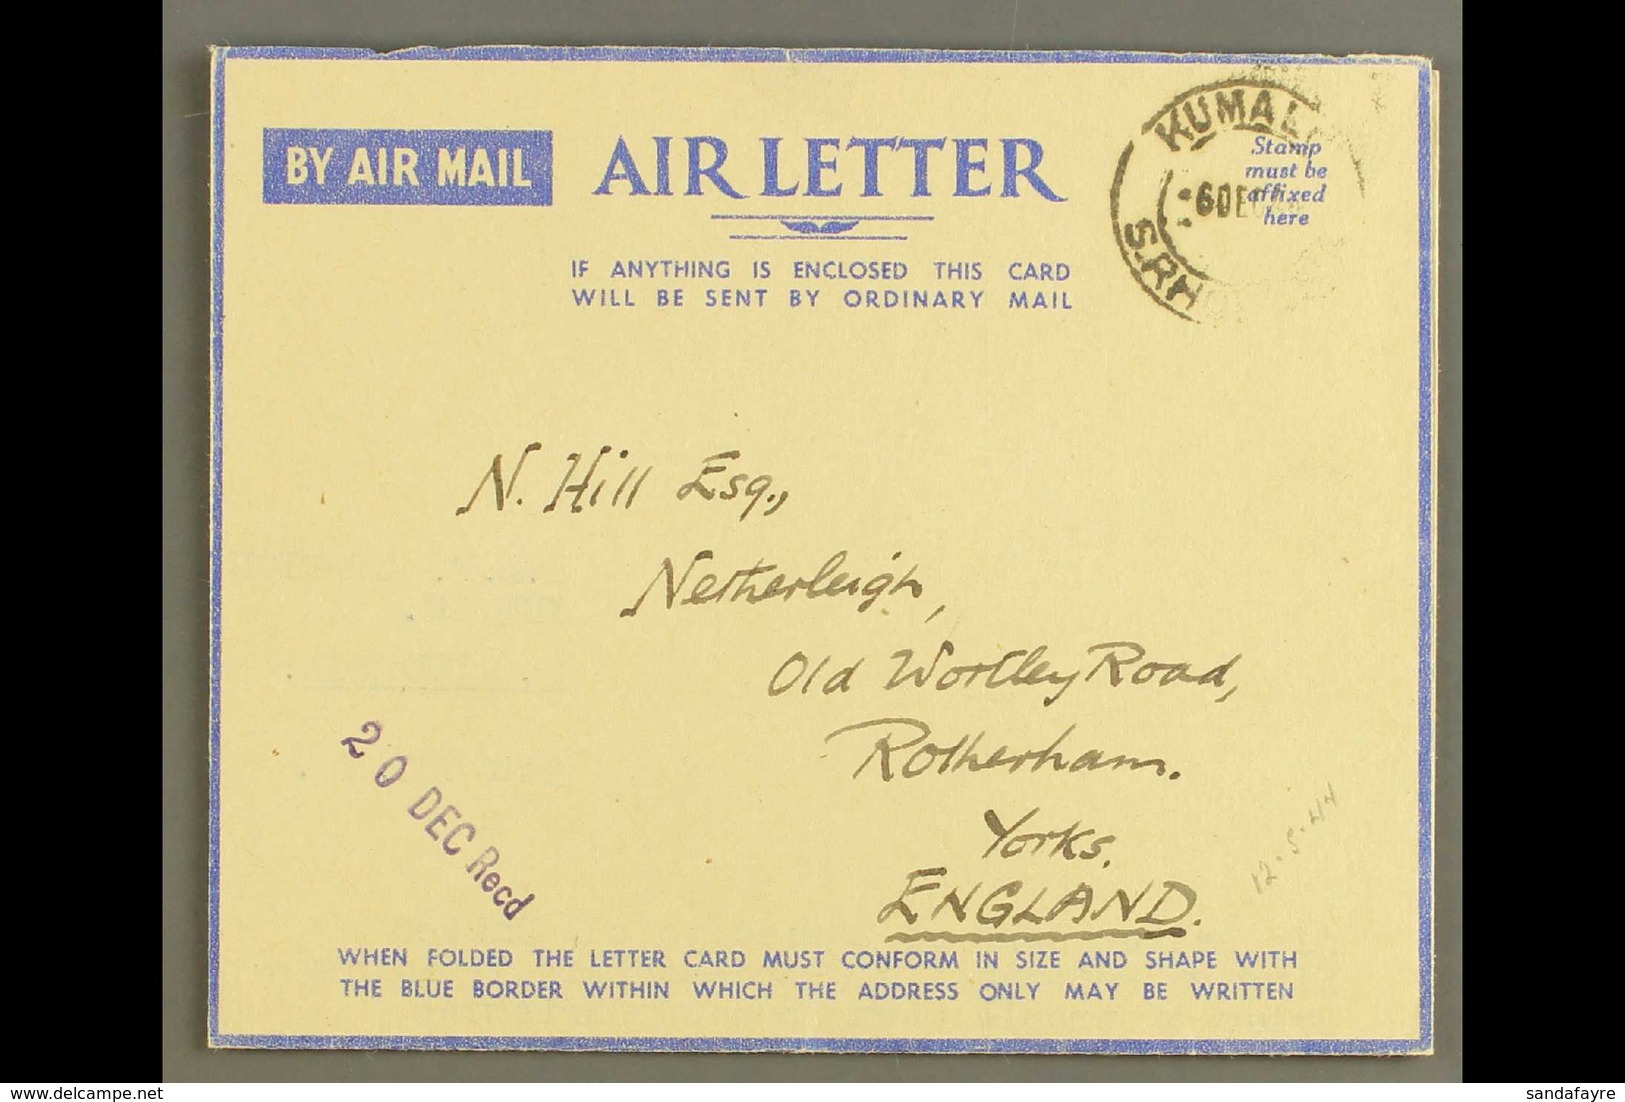 MILITARY AEROGRAMME 1944 (6 Dec) Stampless Air Letter For Christmas Post Concession Primarily For RAF Personnel, Cancell - Südrhodesien (...-1964)